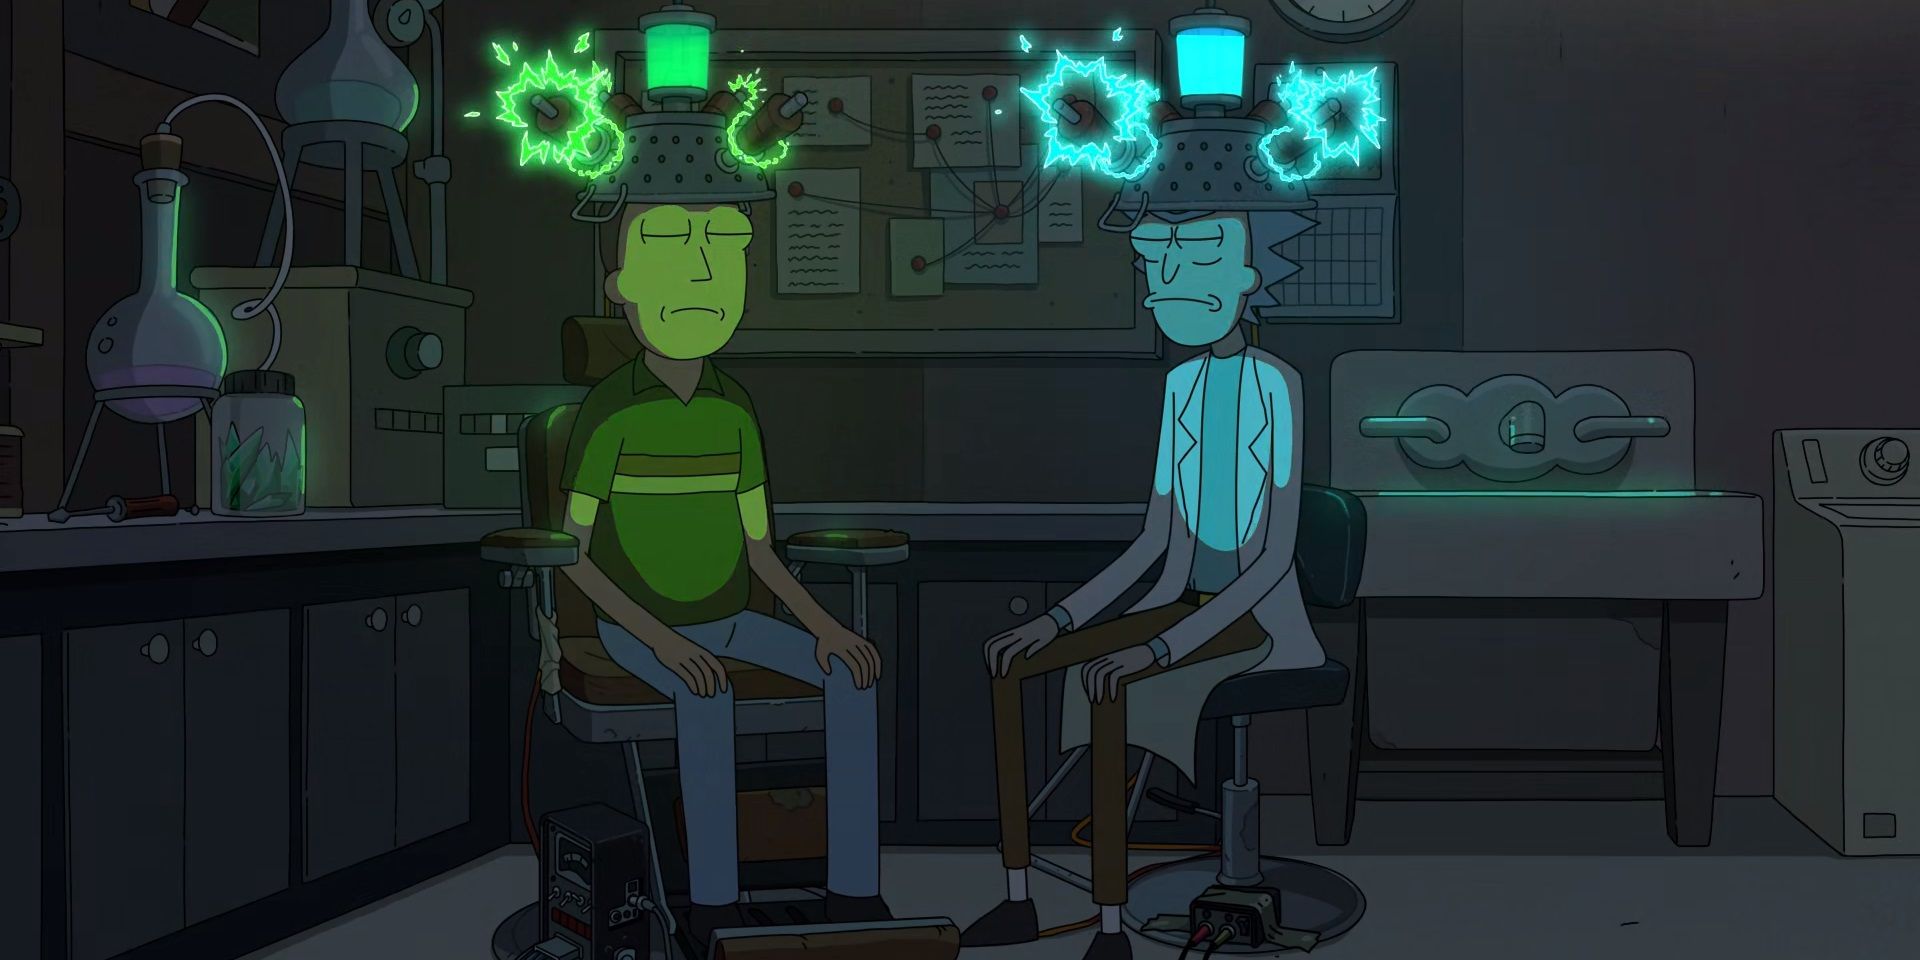 Rick and Jerry switch minds in Rick and Morty